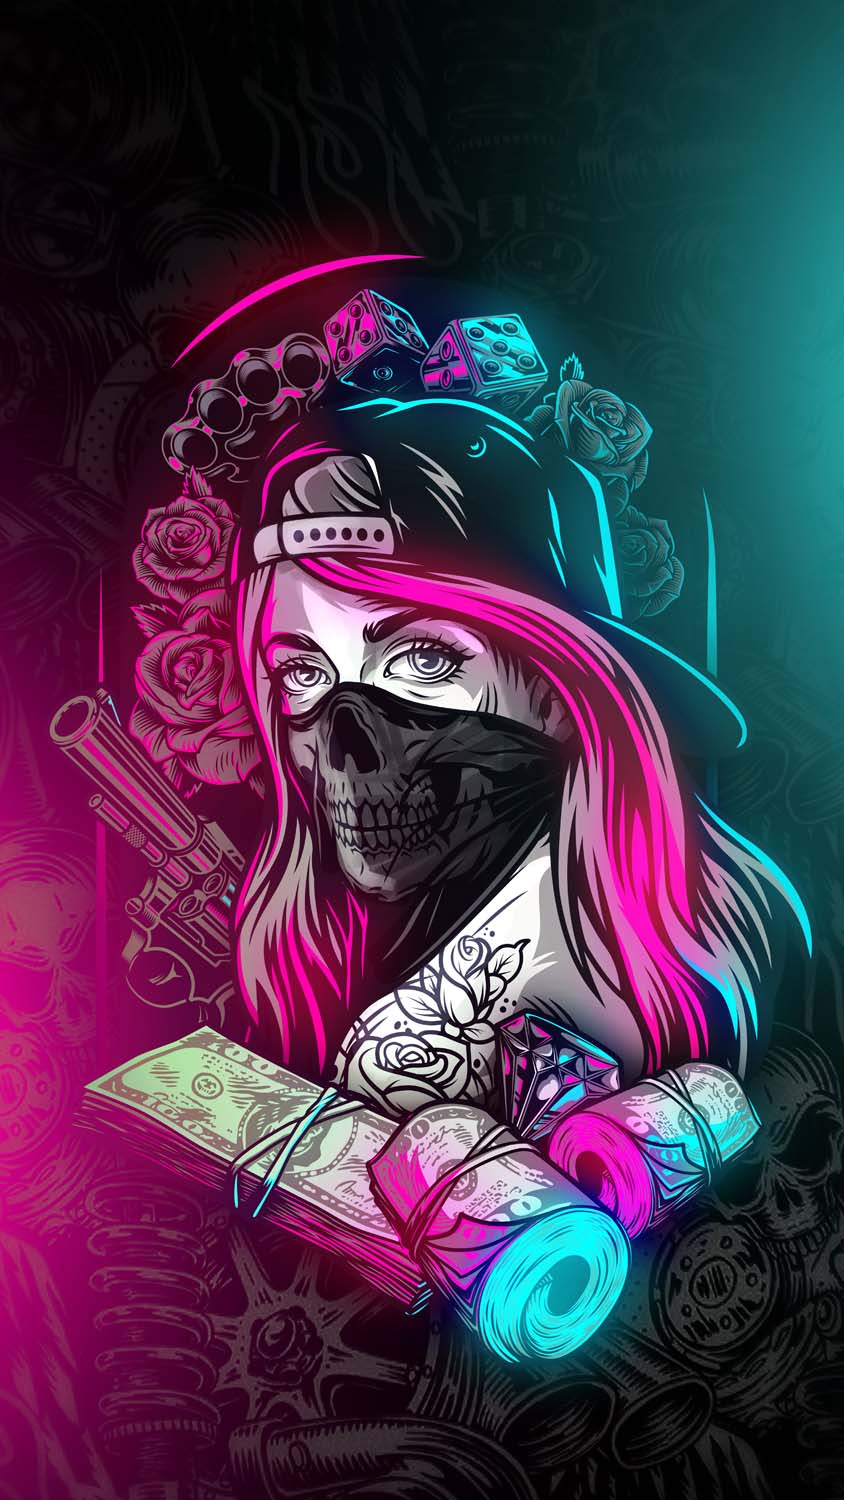 Tattoos And Money IPhone Wallpaper HD - IPhone Wallpapers : iPhone  Wallpapers